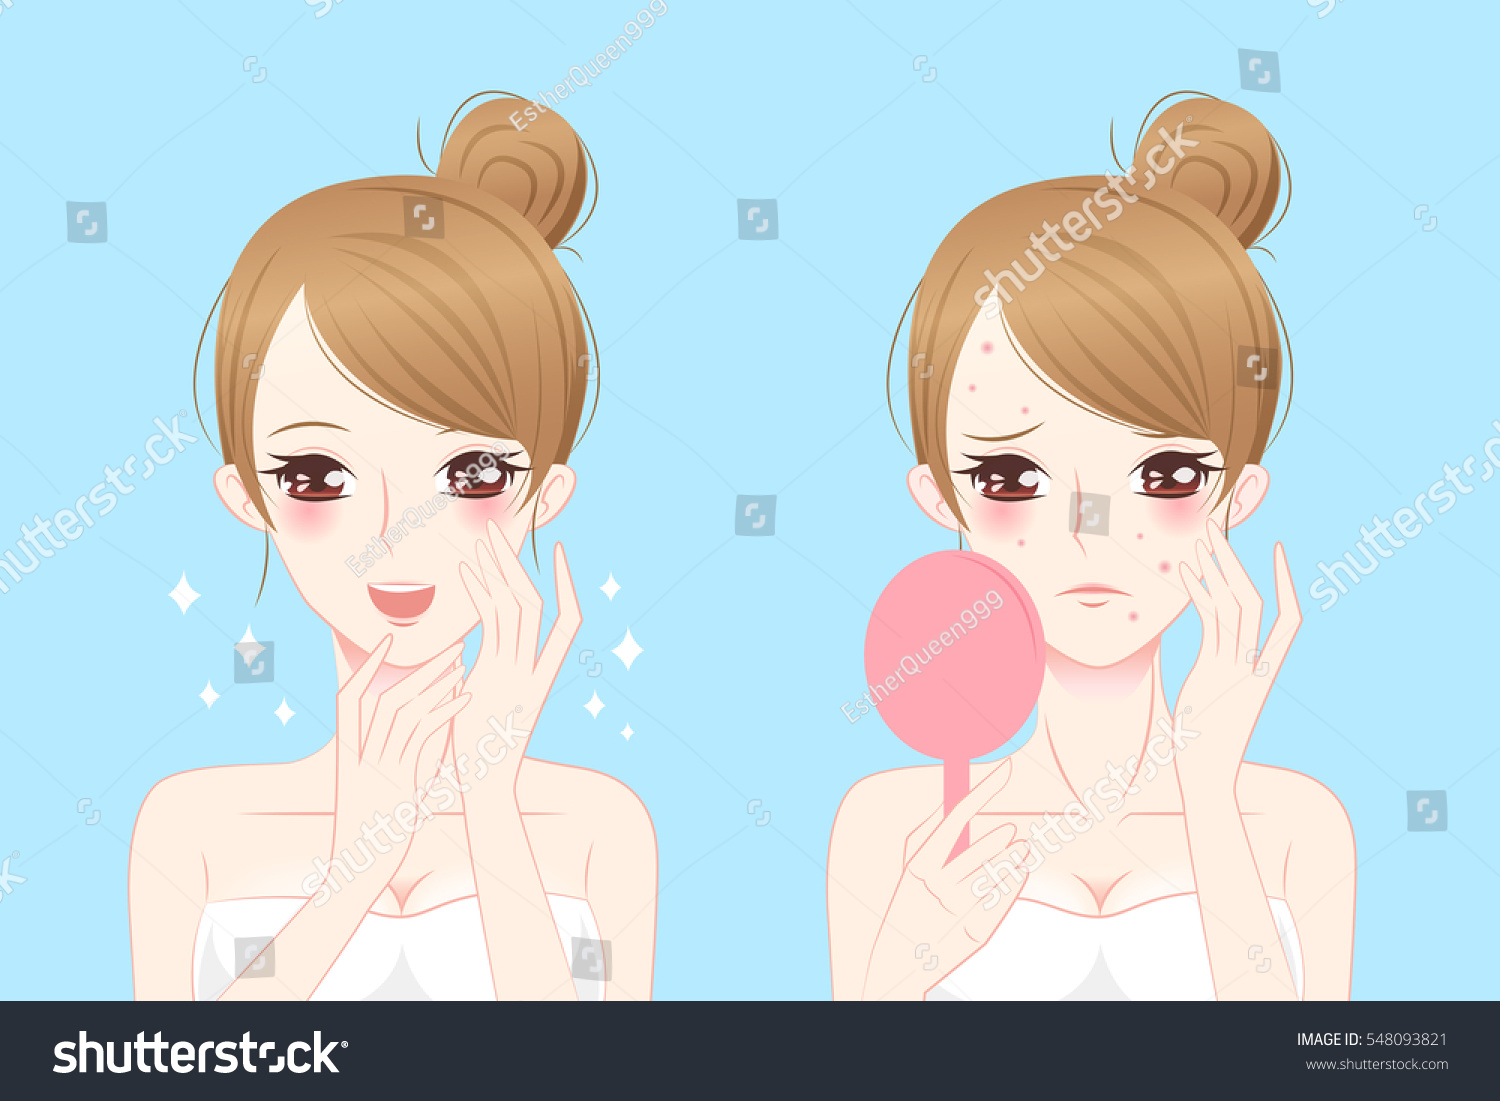 SVG of cartoon woman with acne before and after svg